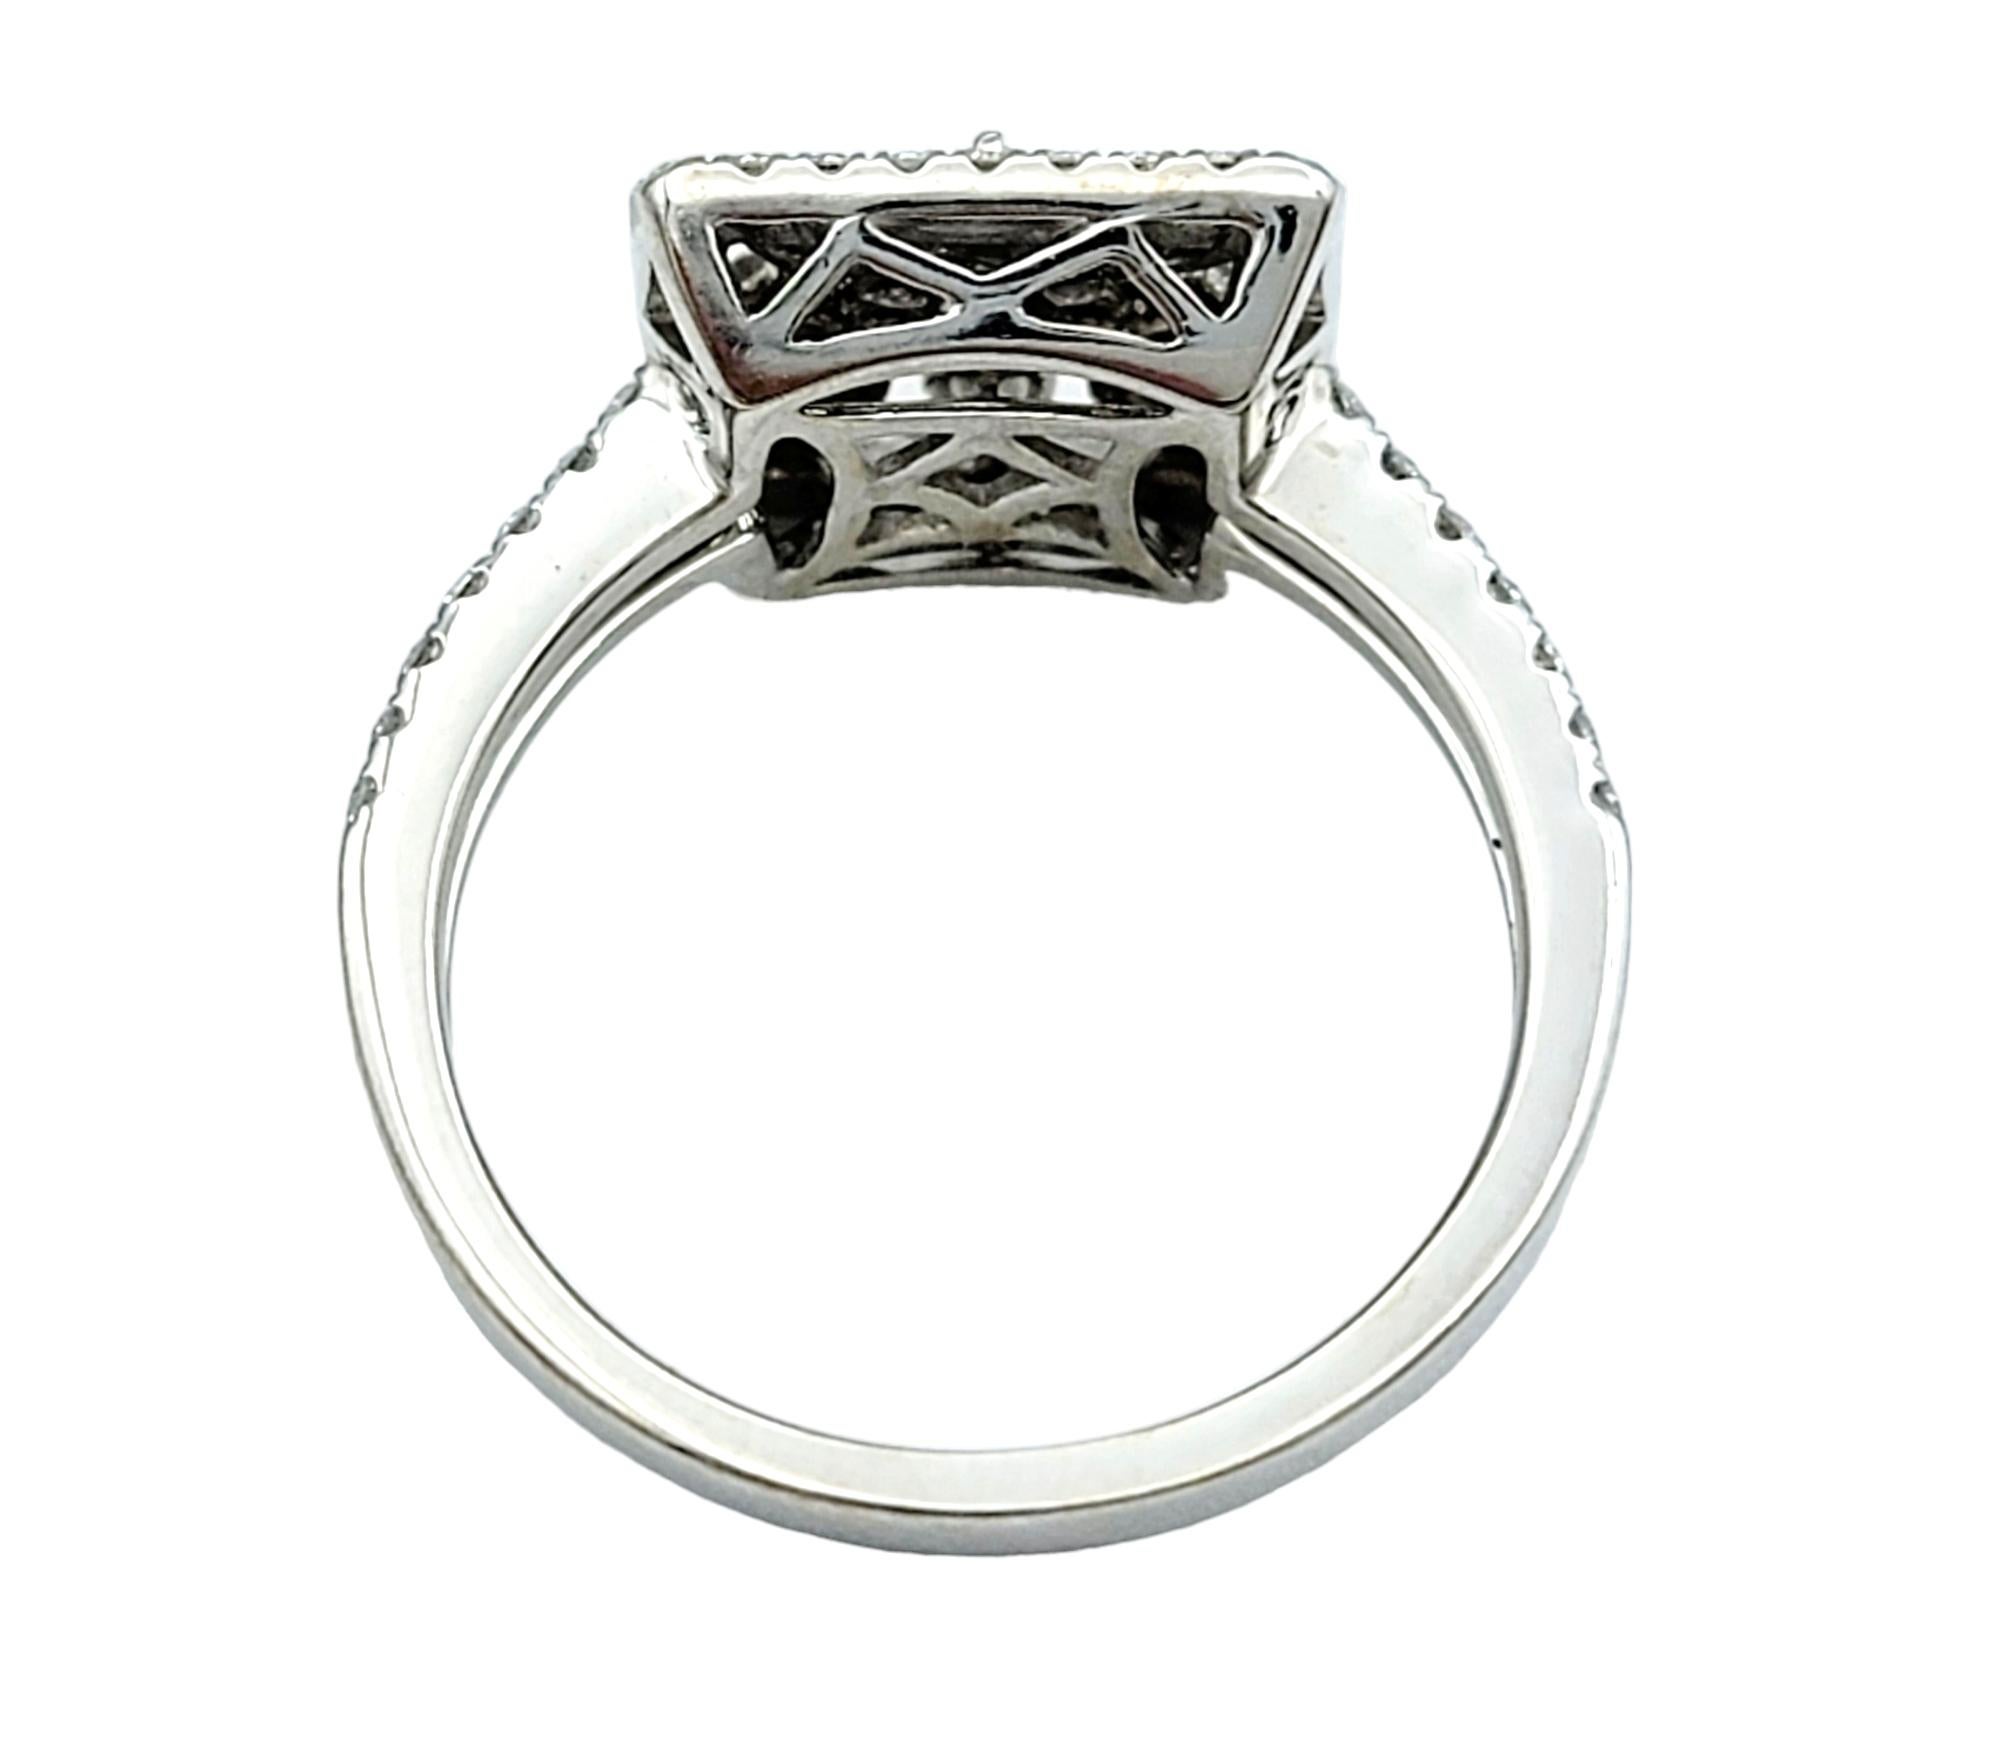 Diamond Band Ring with Open Square Cutout Motif Set in 18 Karat White Gold In Good Condition For Sale In Scottsdale, AZ